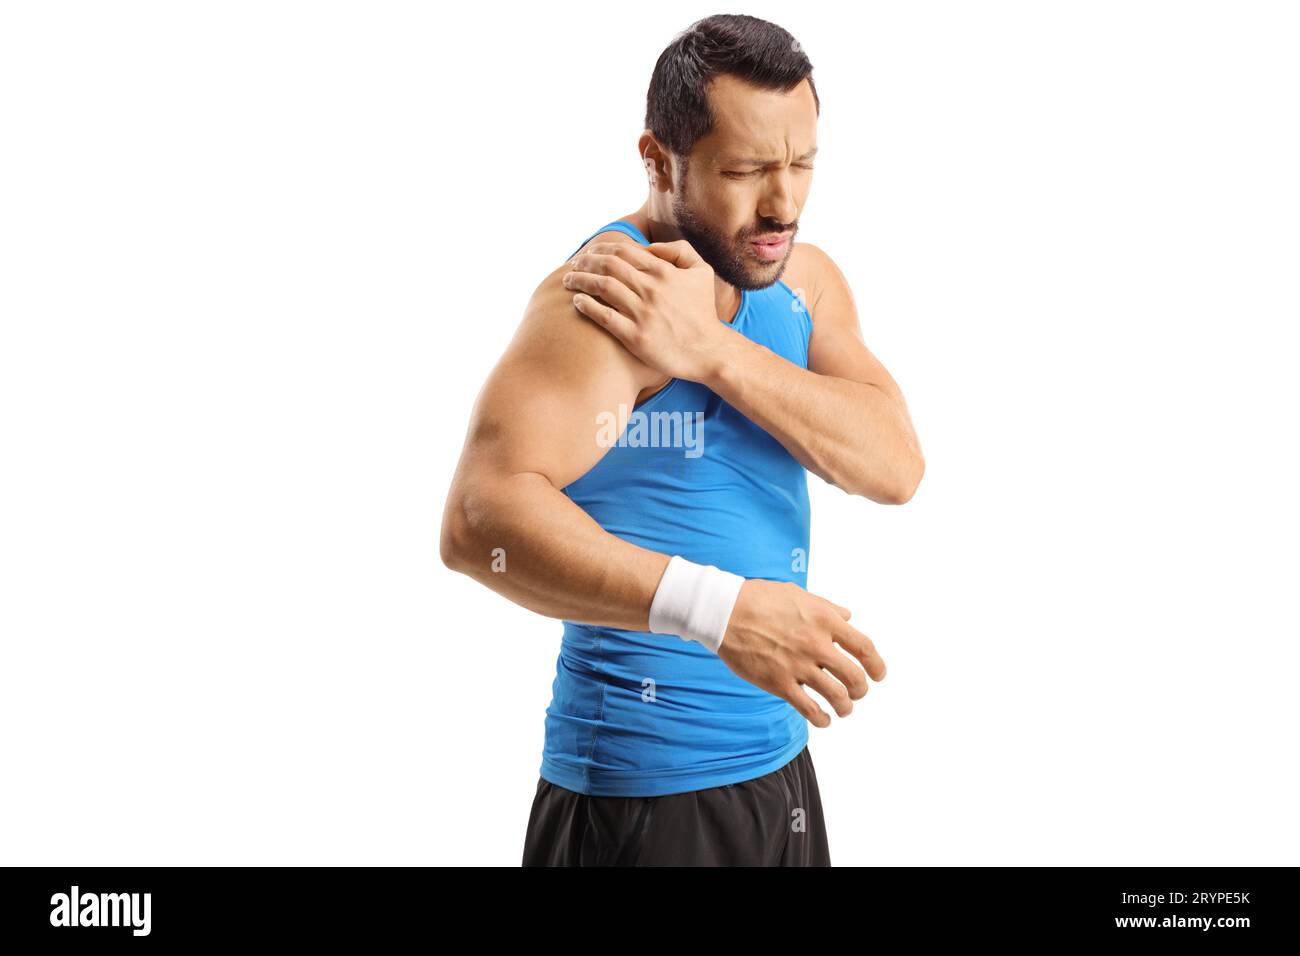 Male athlete holding his shoulder in pain isolated on white background Stock Photo